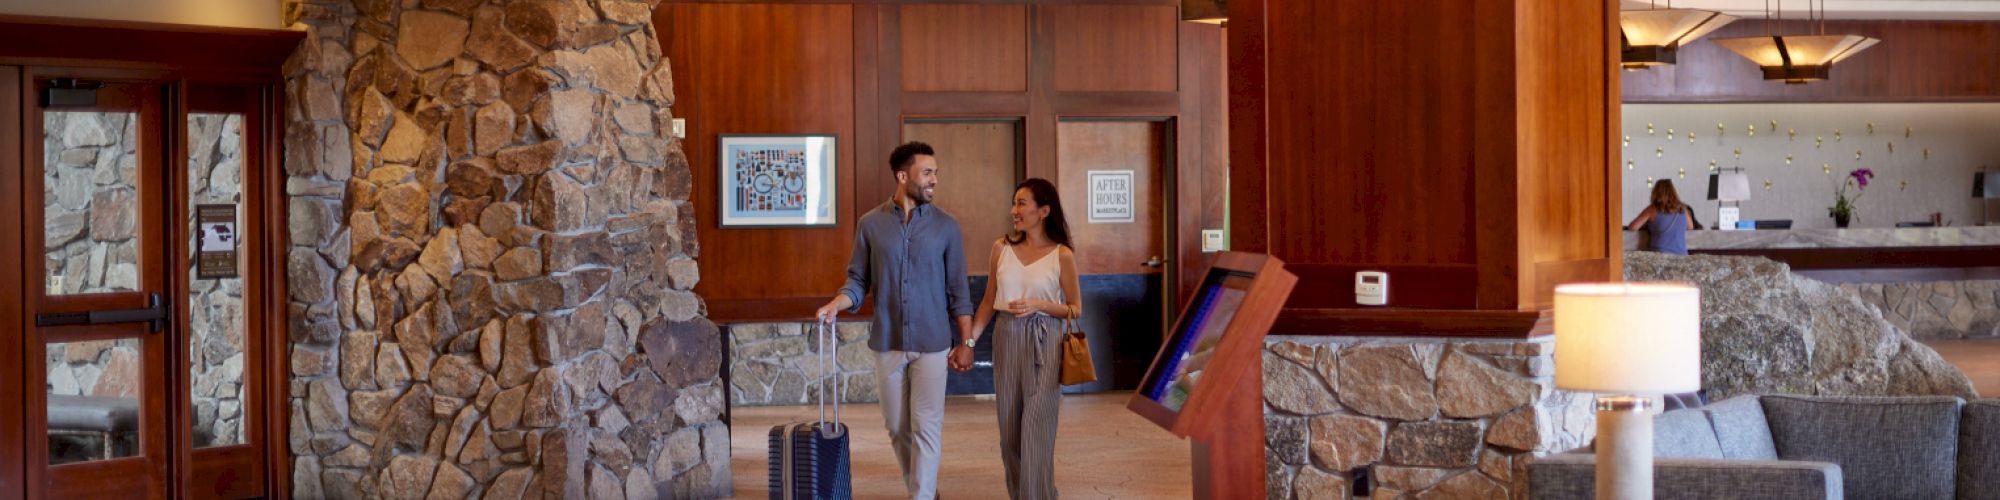 Two people walk through a hotel lobby with suitcases, past a reception desk with staff and seating area.